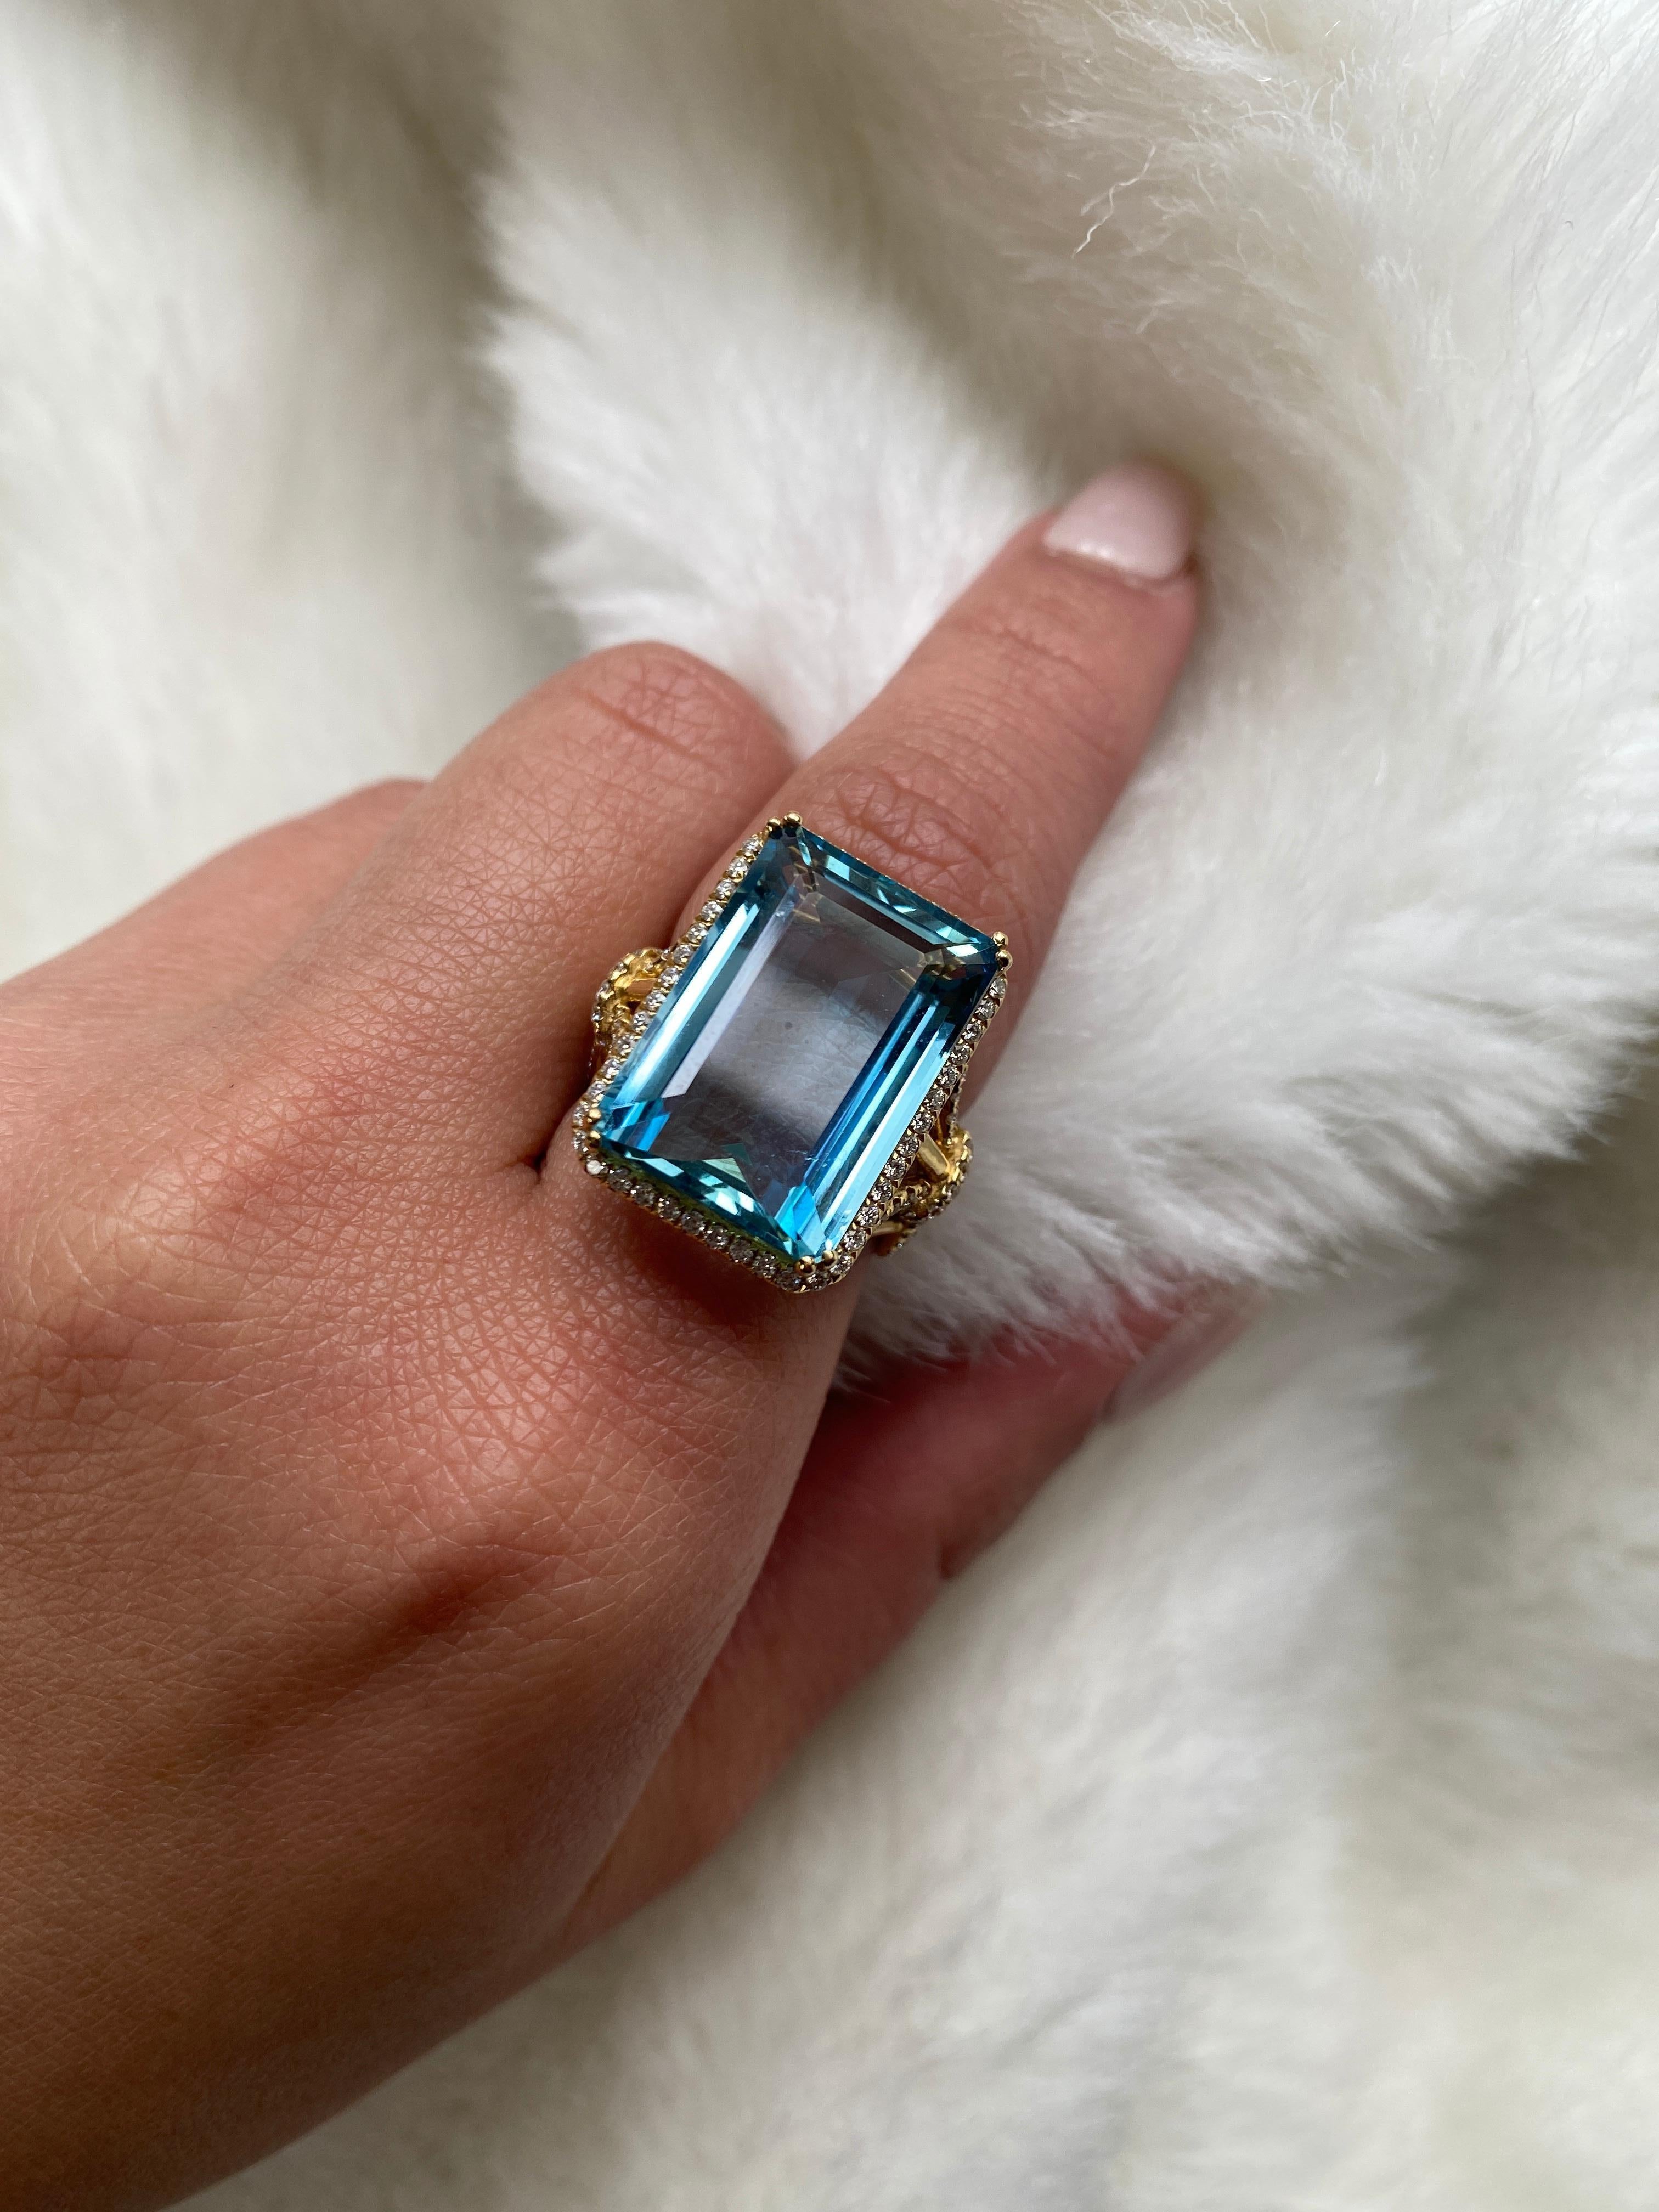 Aqua Emerald Cut Ring with Diamonds in 18K Yellow Gold, from 'G-One' Collection.

Approx. Stone Weight: 14.14 Carats (Aqua)

Diamonds: G-H / VS, Approx. Wt: 0.74 Carats